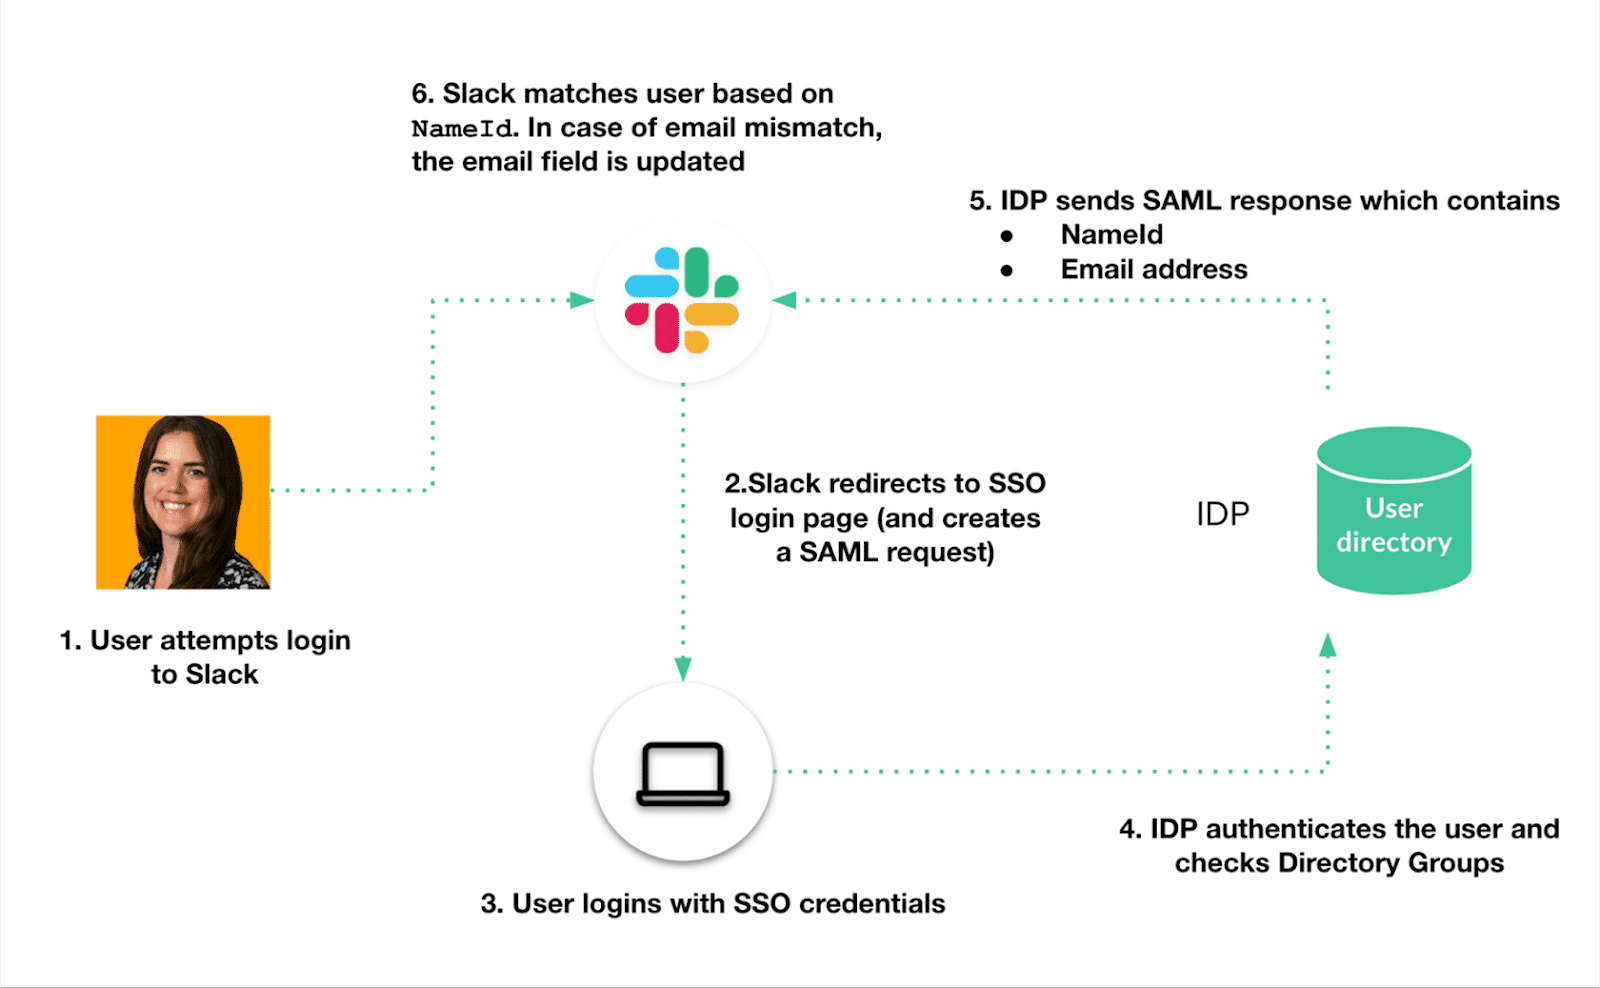 the login process described above, depicted as a diagram